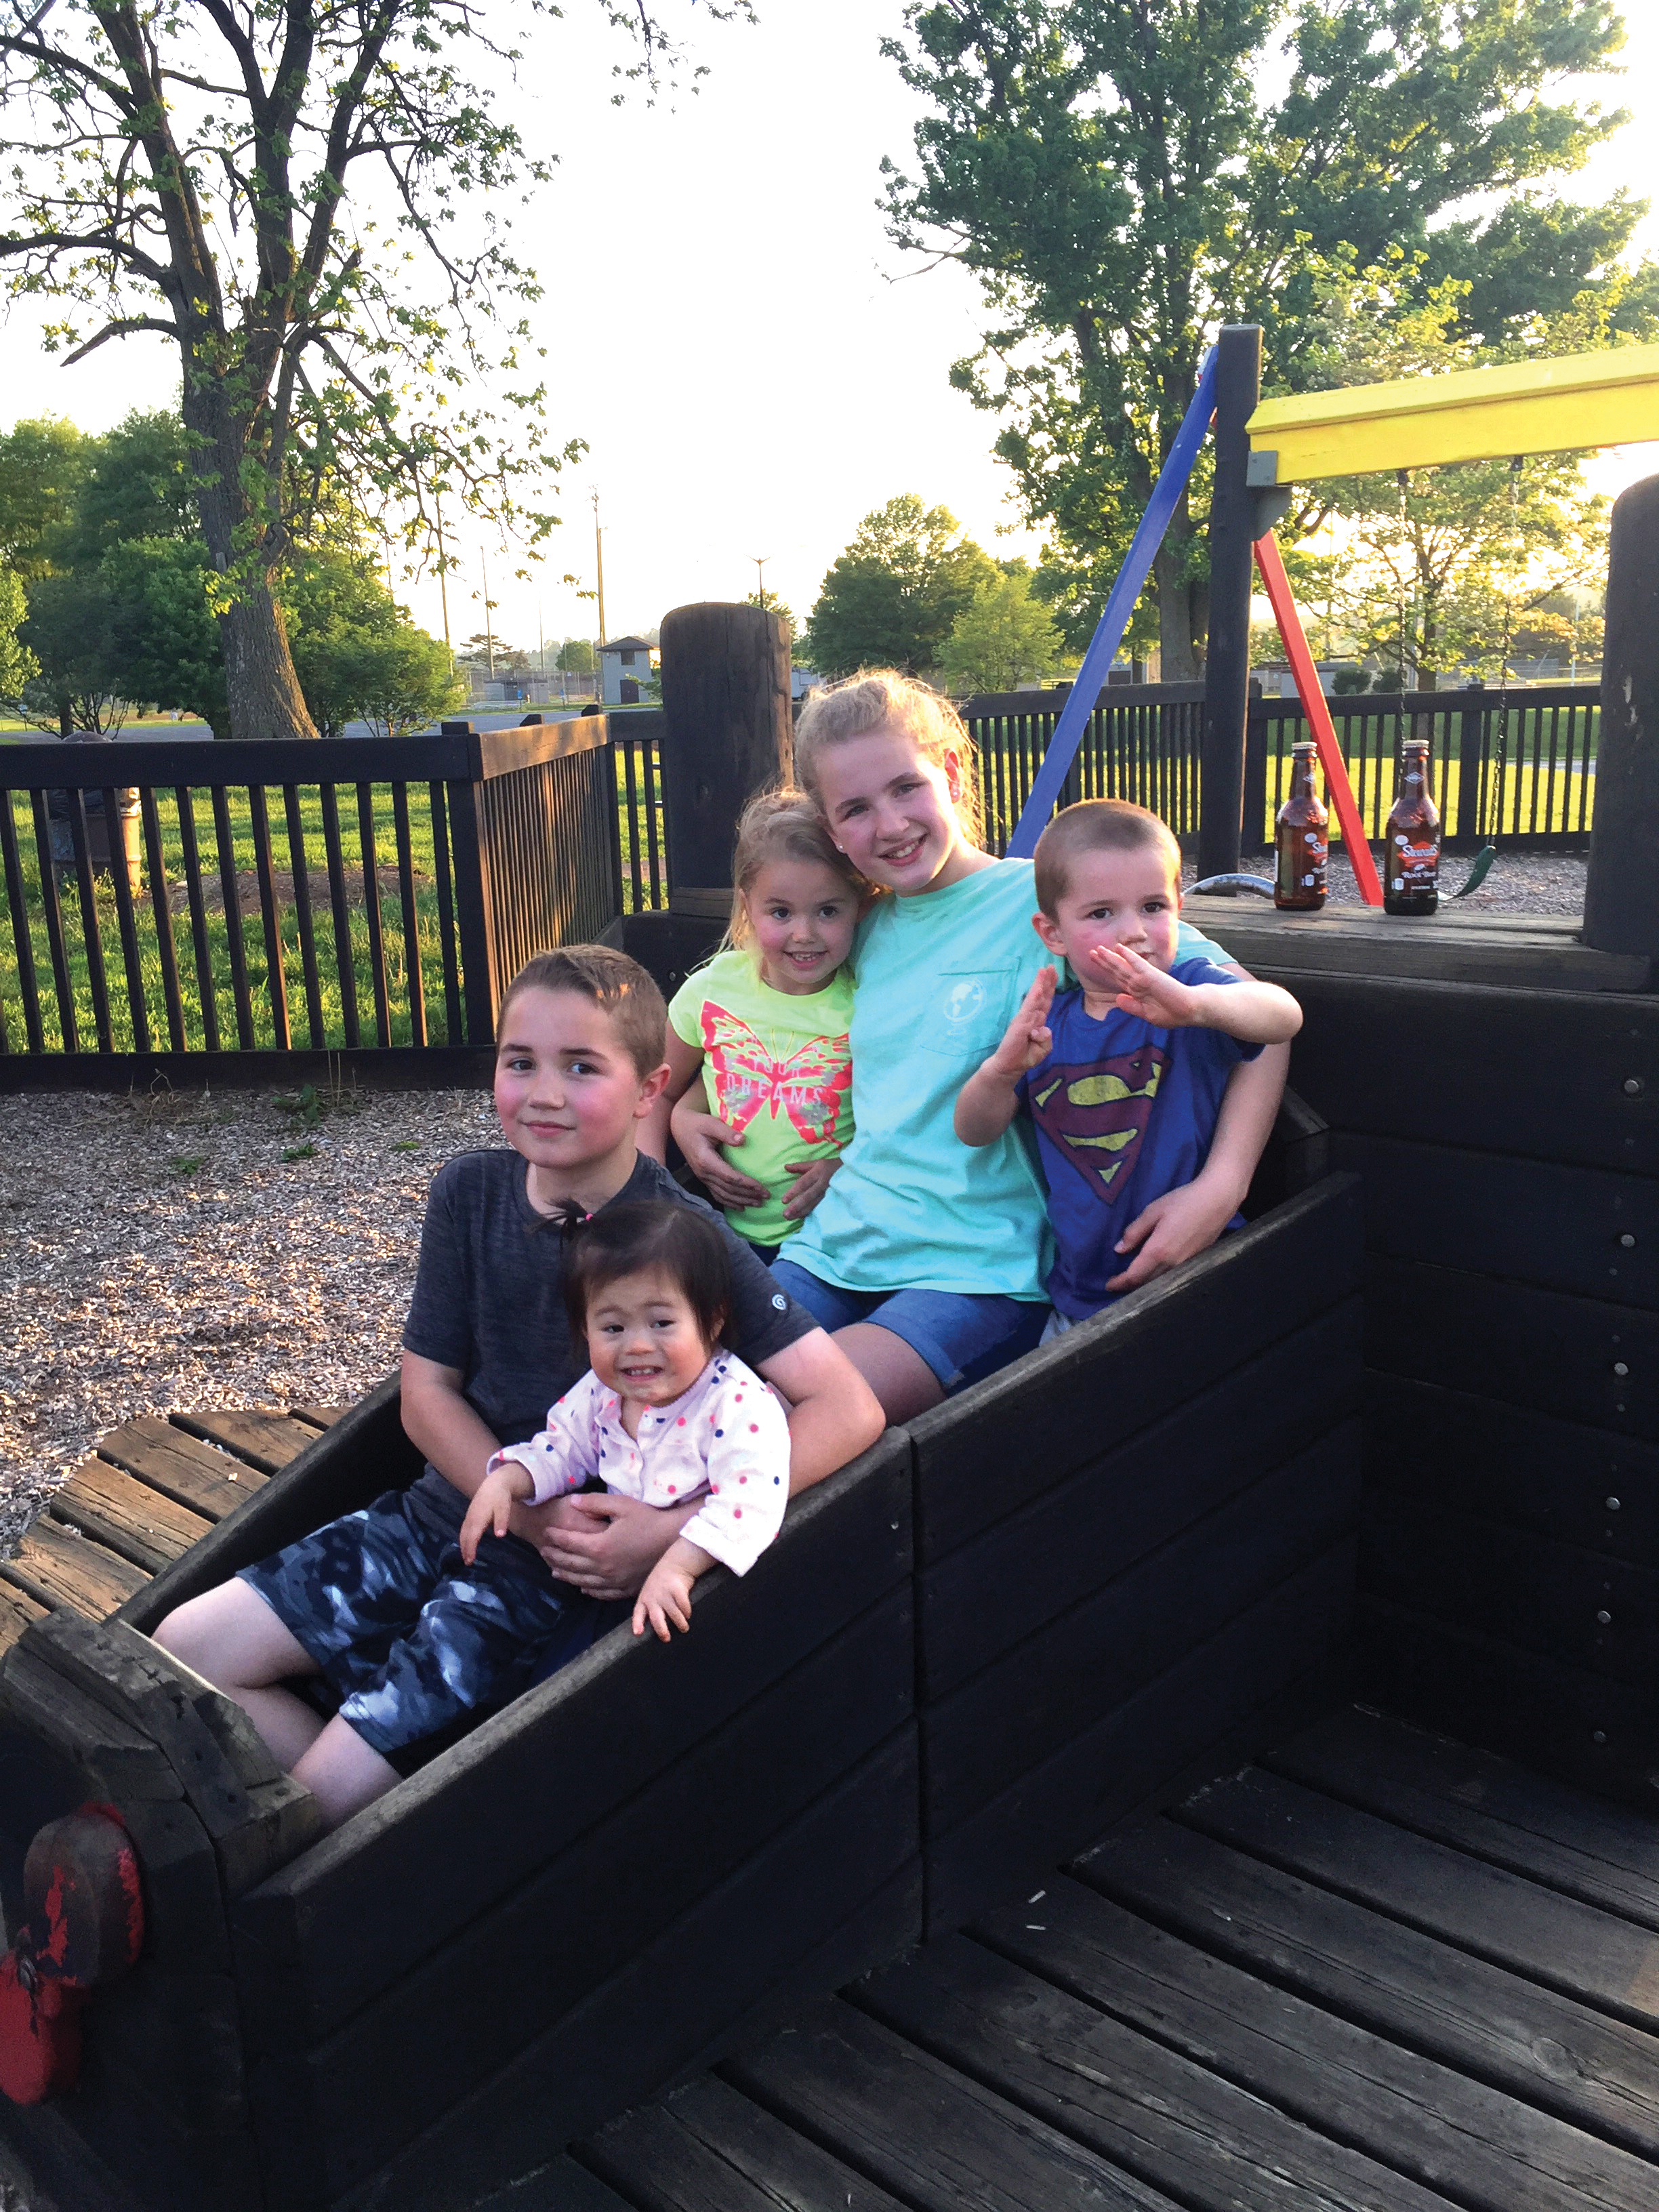 The Hostetter kids having fun together at the park. 